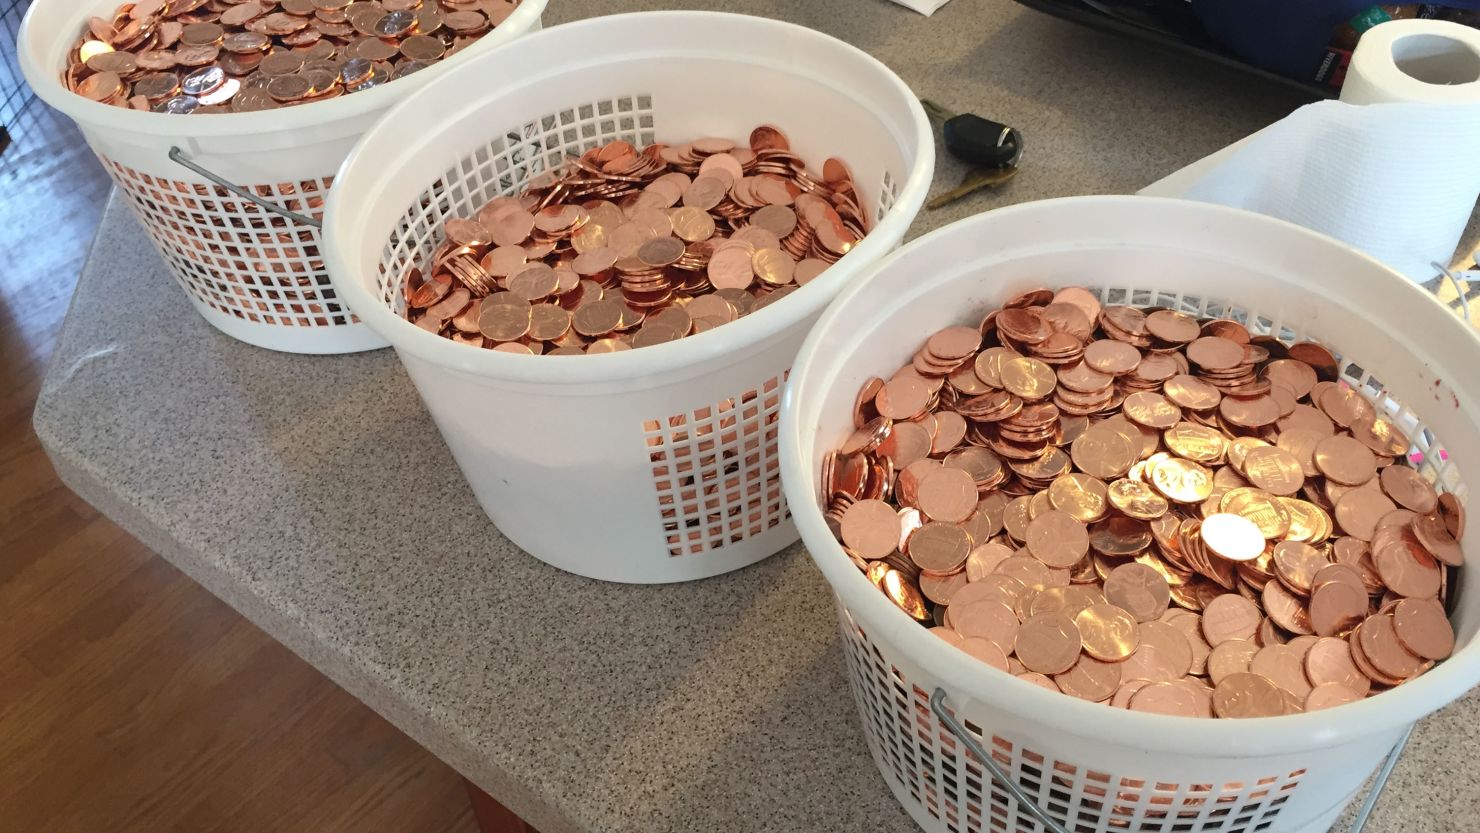 Stephen Coyle used 60 pounds of pennies to pay off his parking fines in a protest.